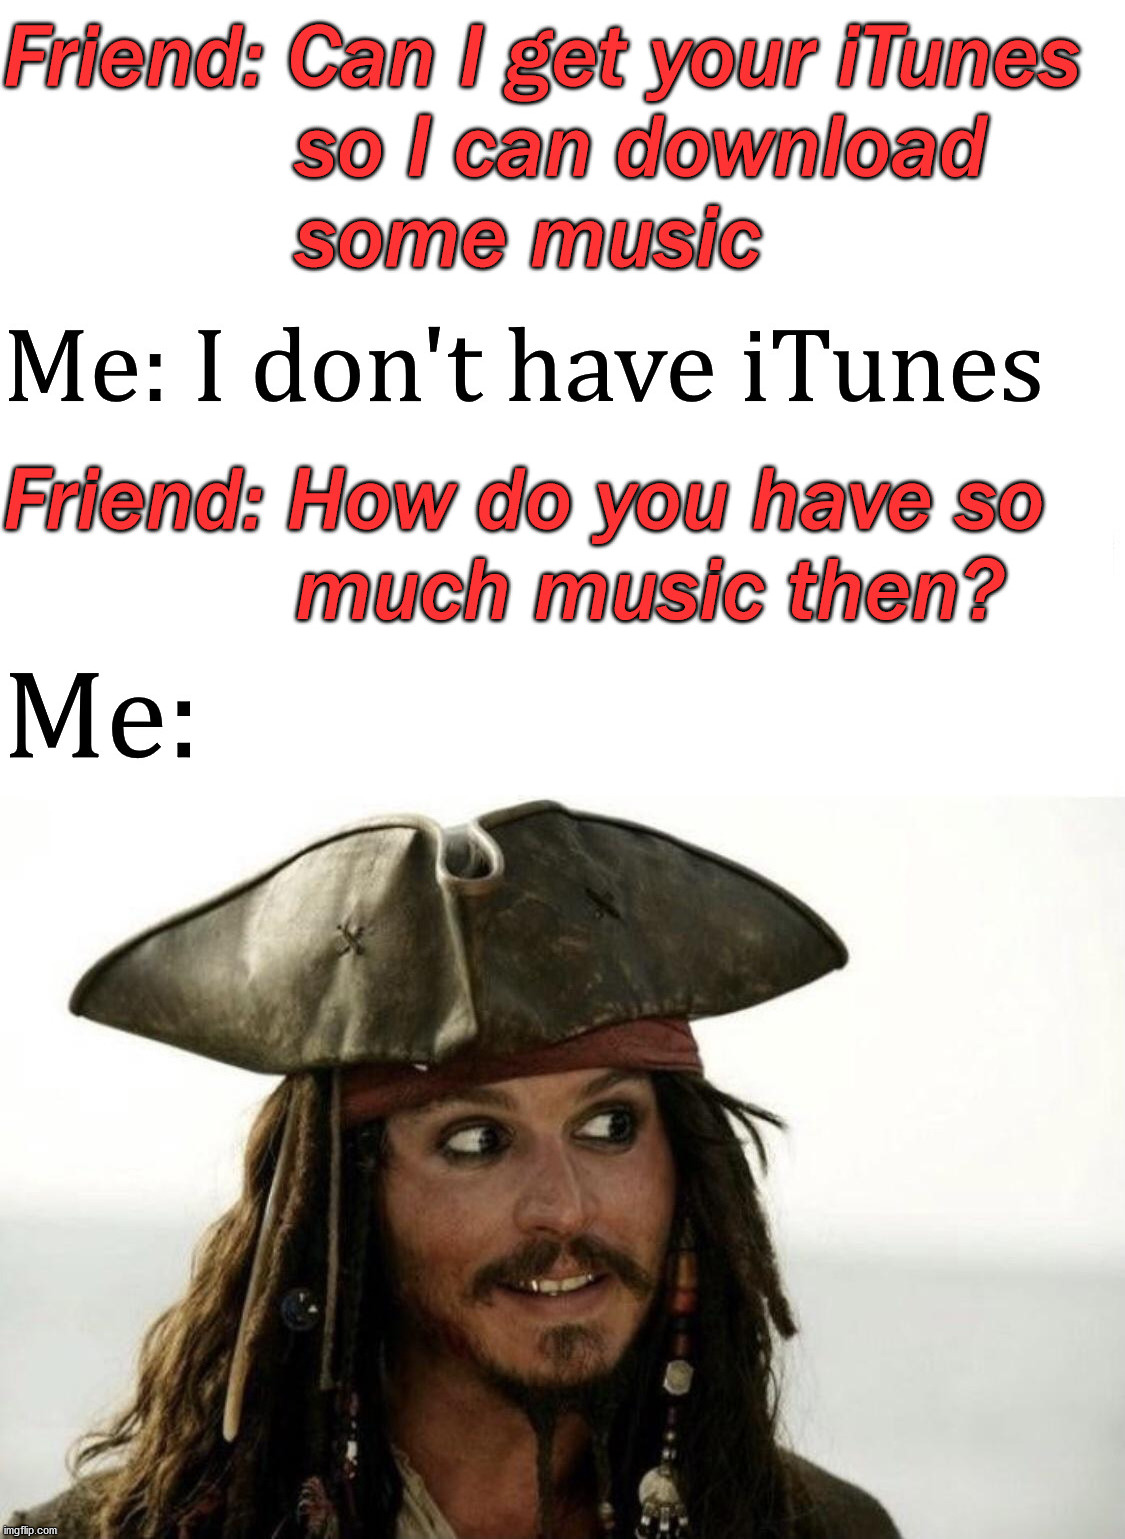 I pirate all my music and programs. | image tagged in pirate,itunes | made w/ Imgflip meme maker